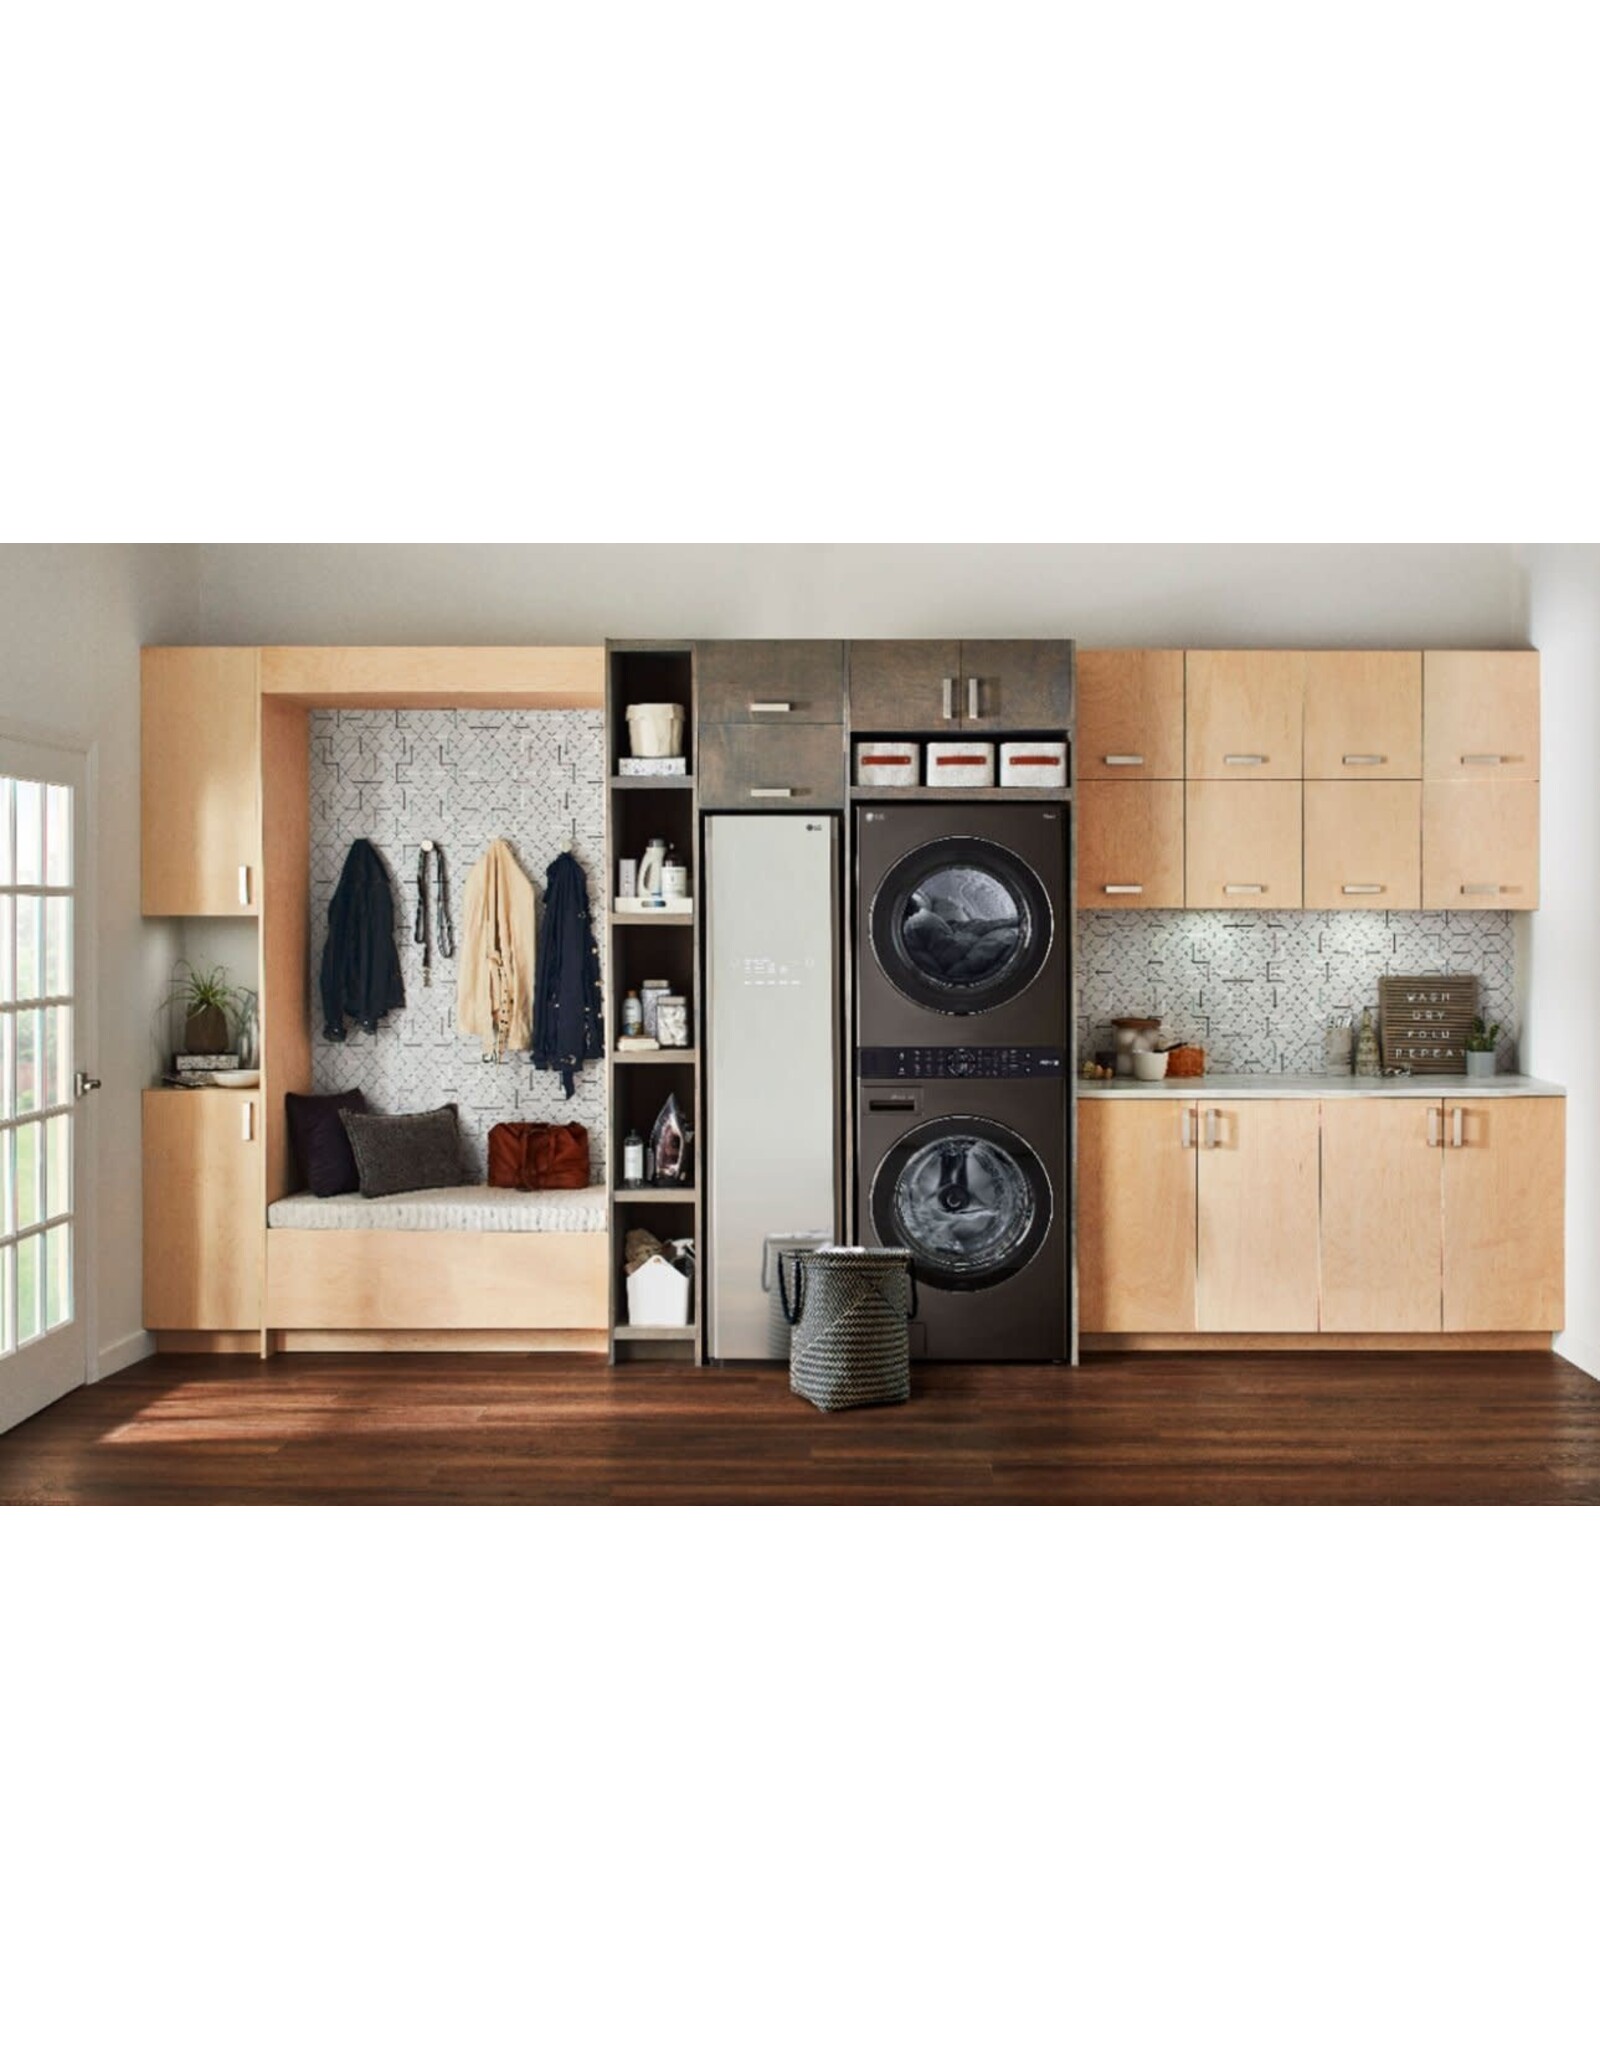 LG Electronics WKEX200HBA 27 in. Black Steel WashTower Laundry Center with 4.5 cu. ft. Front Load Washer and 7.4 cu. ft. Electric Dryer